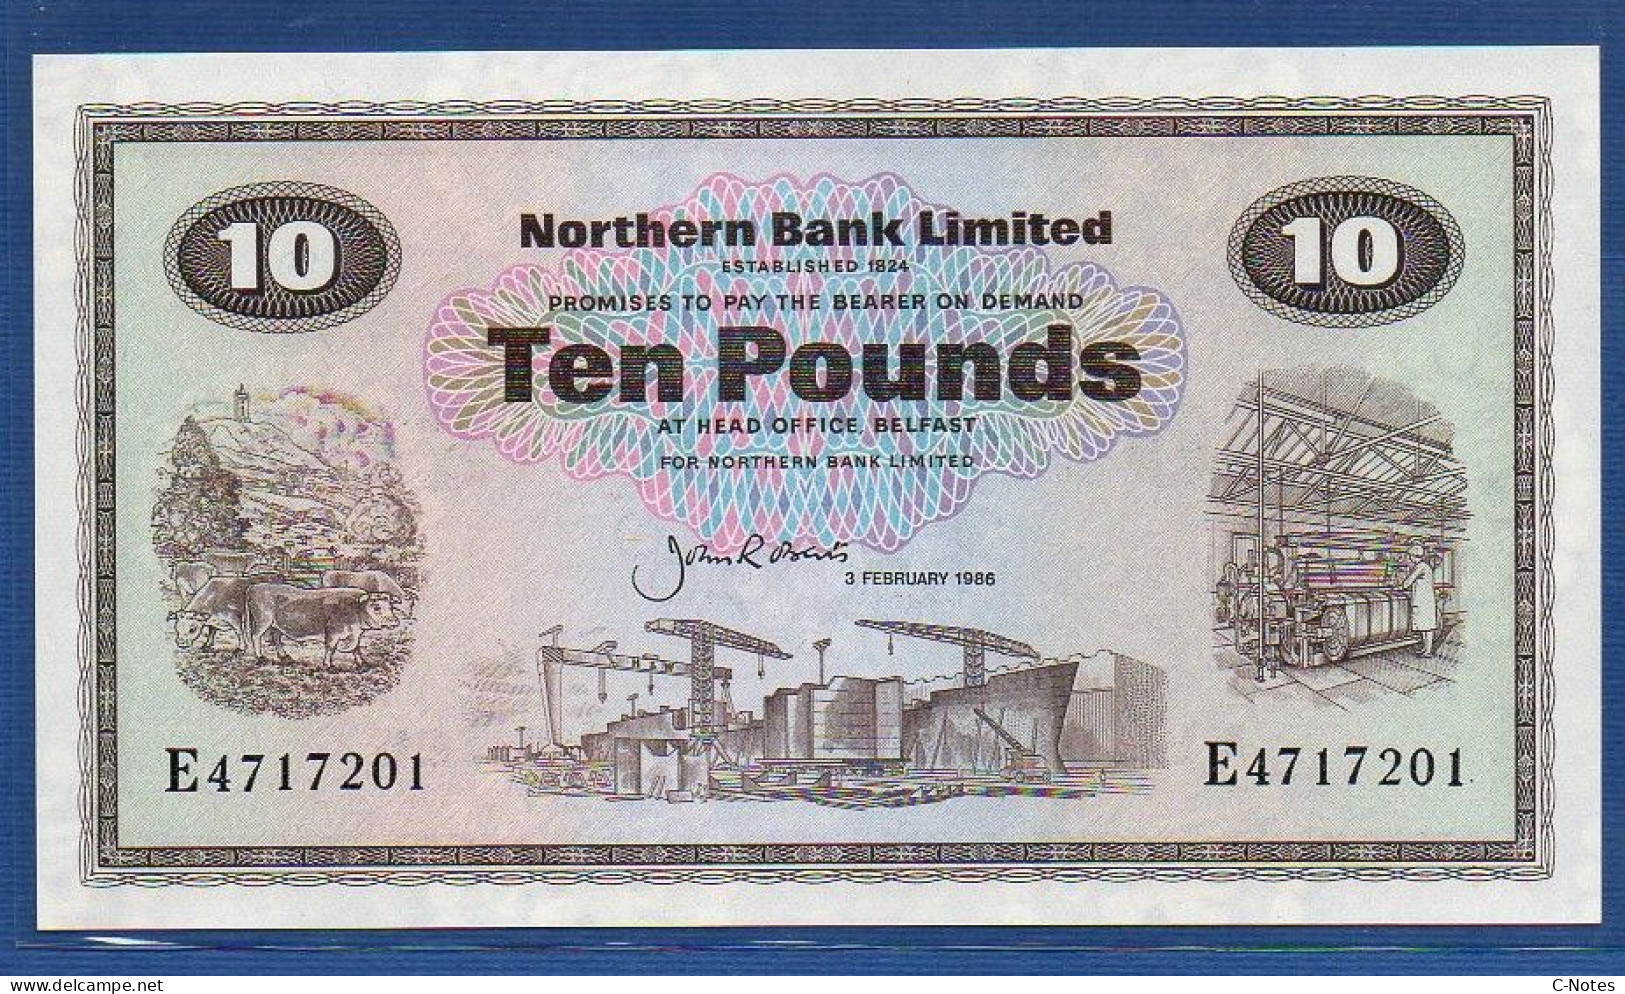 NORTHERN IRELAND - P.189e – 10 POUNDS 03.02.1986 UNC, S/n E4717201 Northern Bank Limited - 10 Pounds